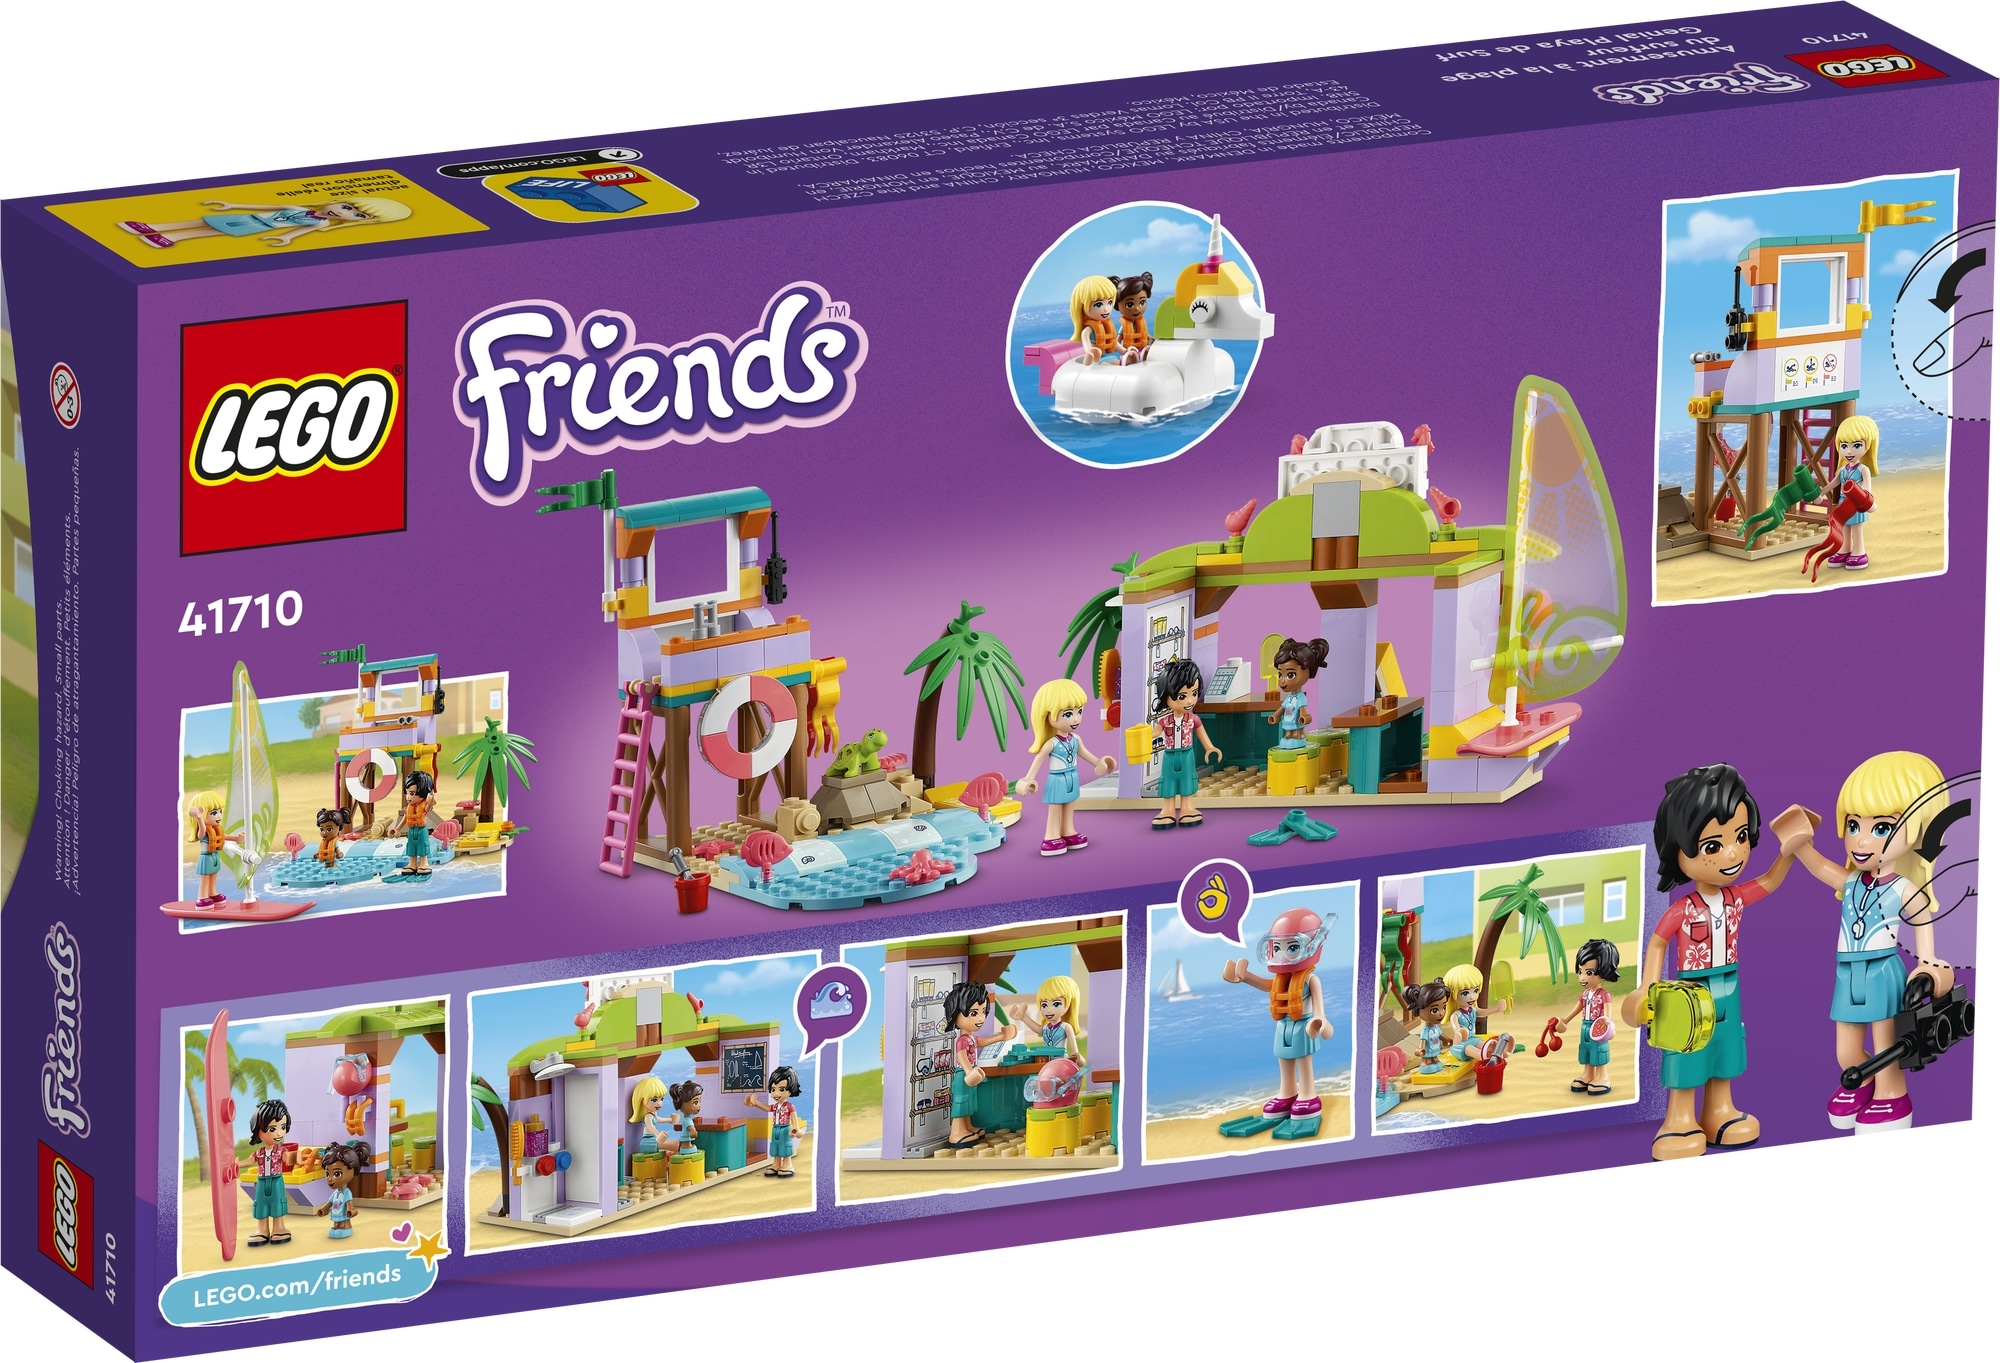 LEGO Friends Summer 2022 Sets Revealed! The Brick Post!